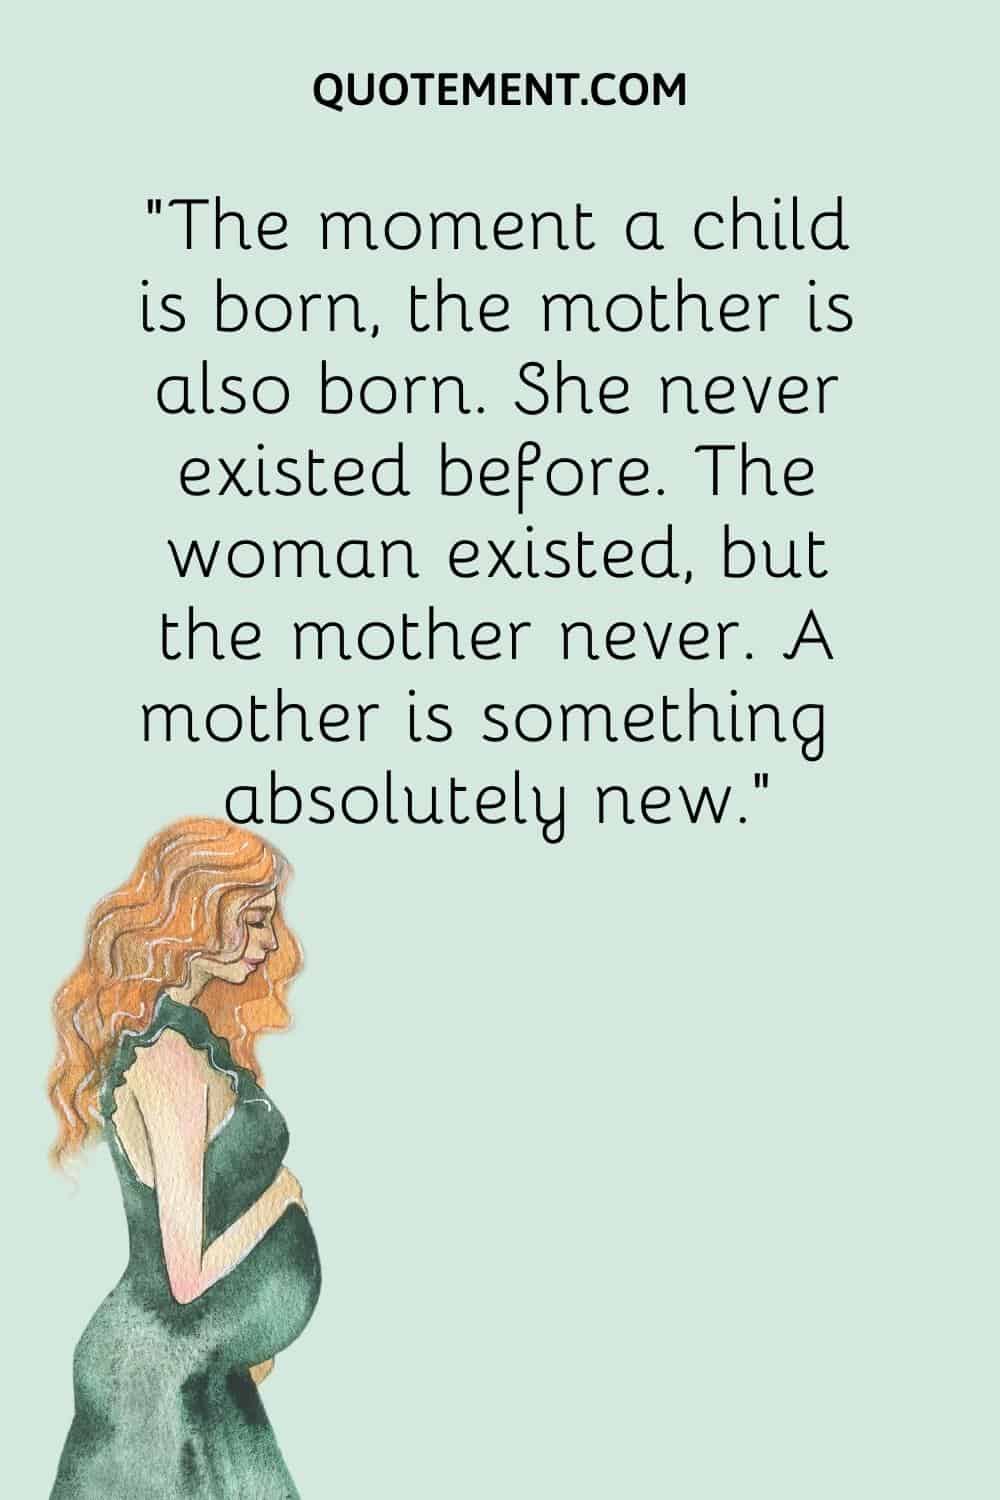 “The moment a child is born, the mother is also born. She never existed before. The woman existed, but the mother never. A mother is something absolutely new.”